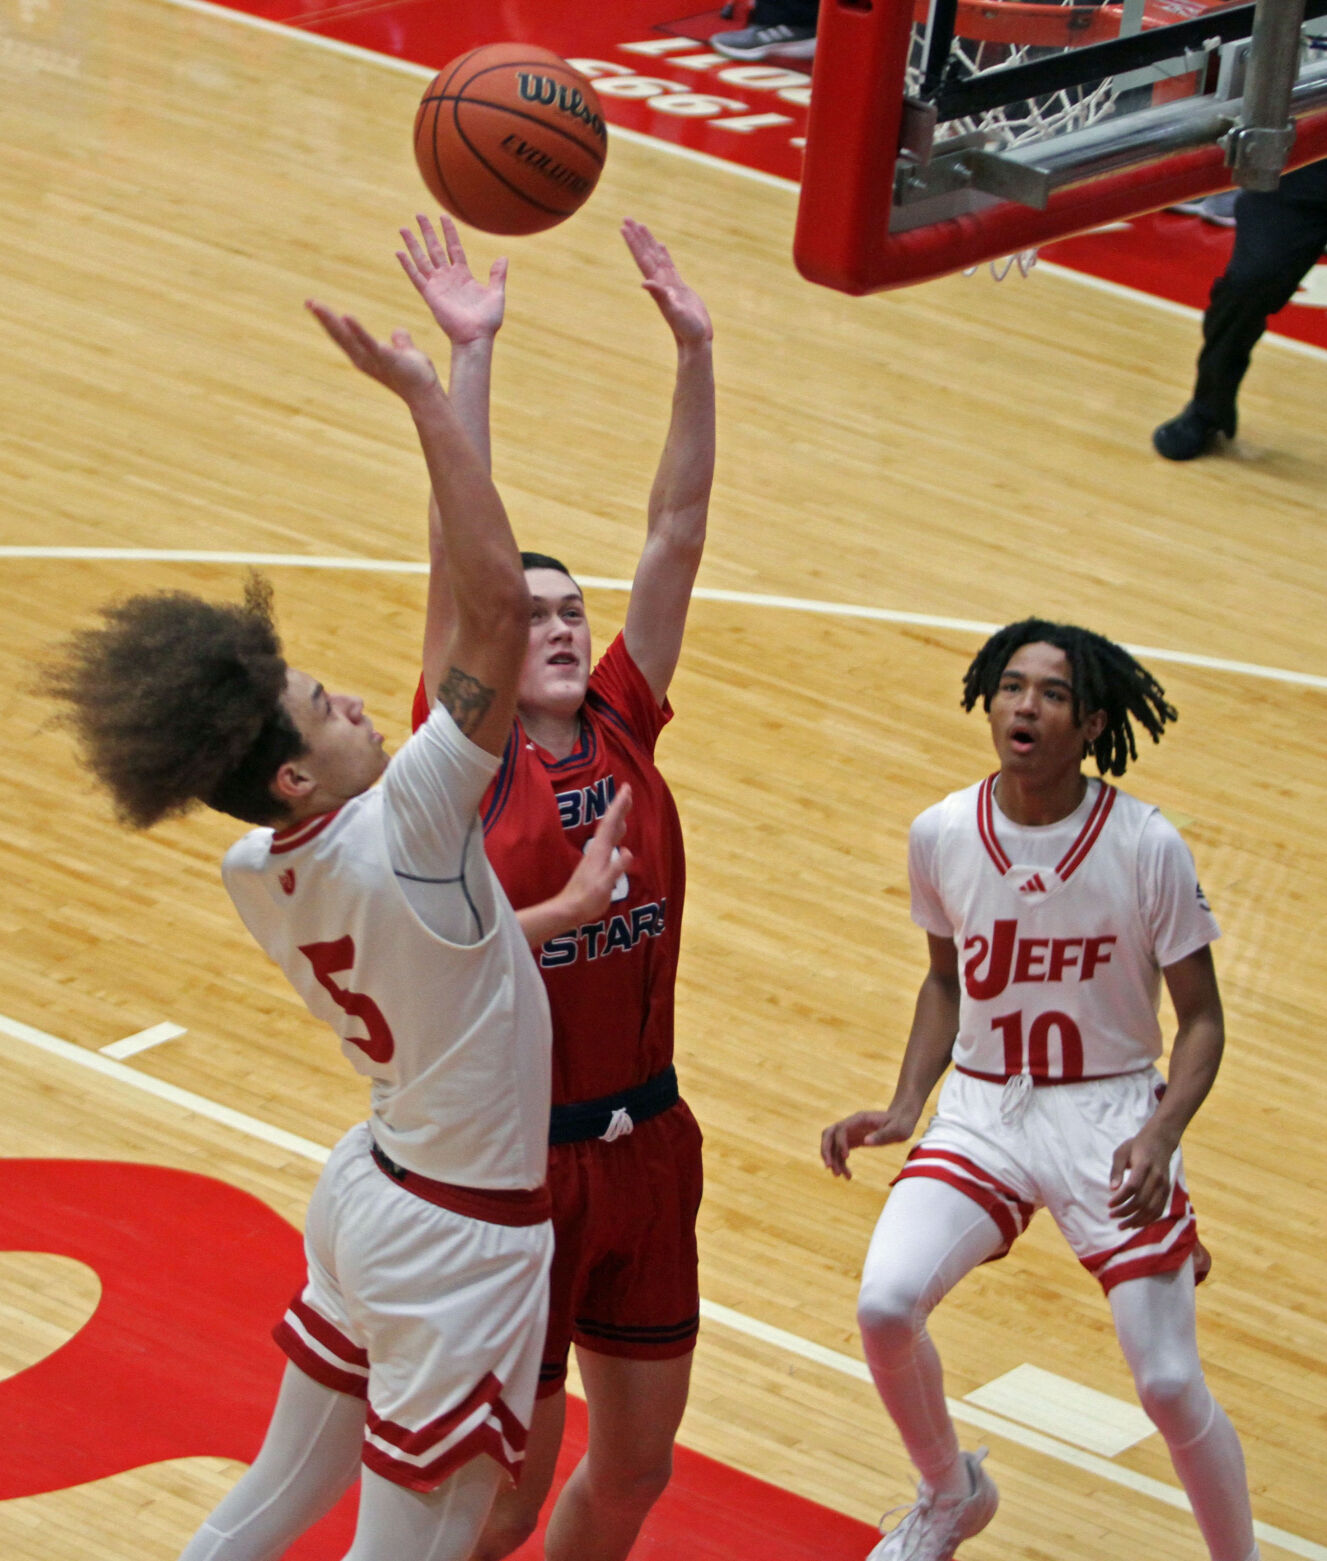 Jeffersonville’s Dominant Pressure Defense Forces 19 Turnovers in Win Against Bedford North Lawrence